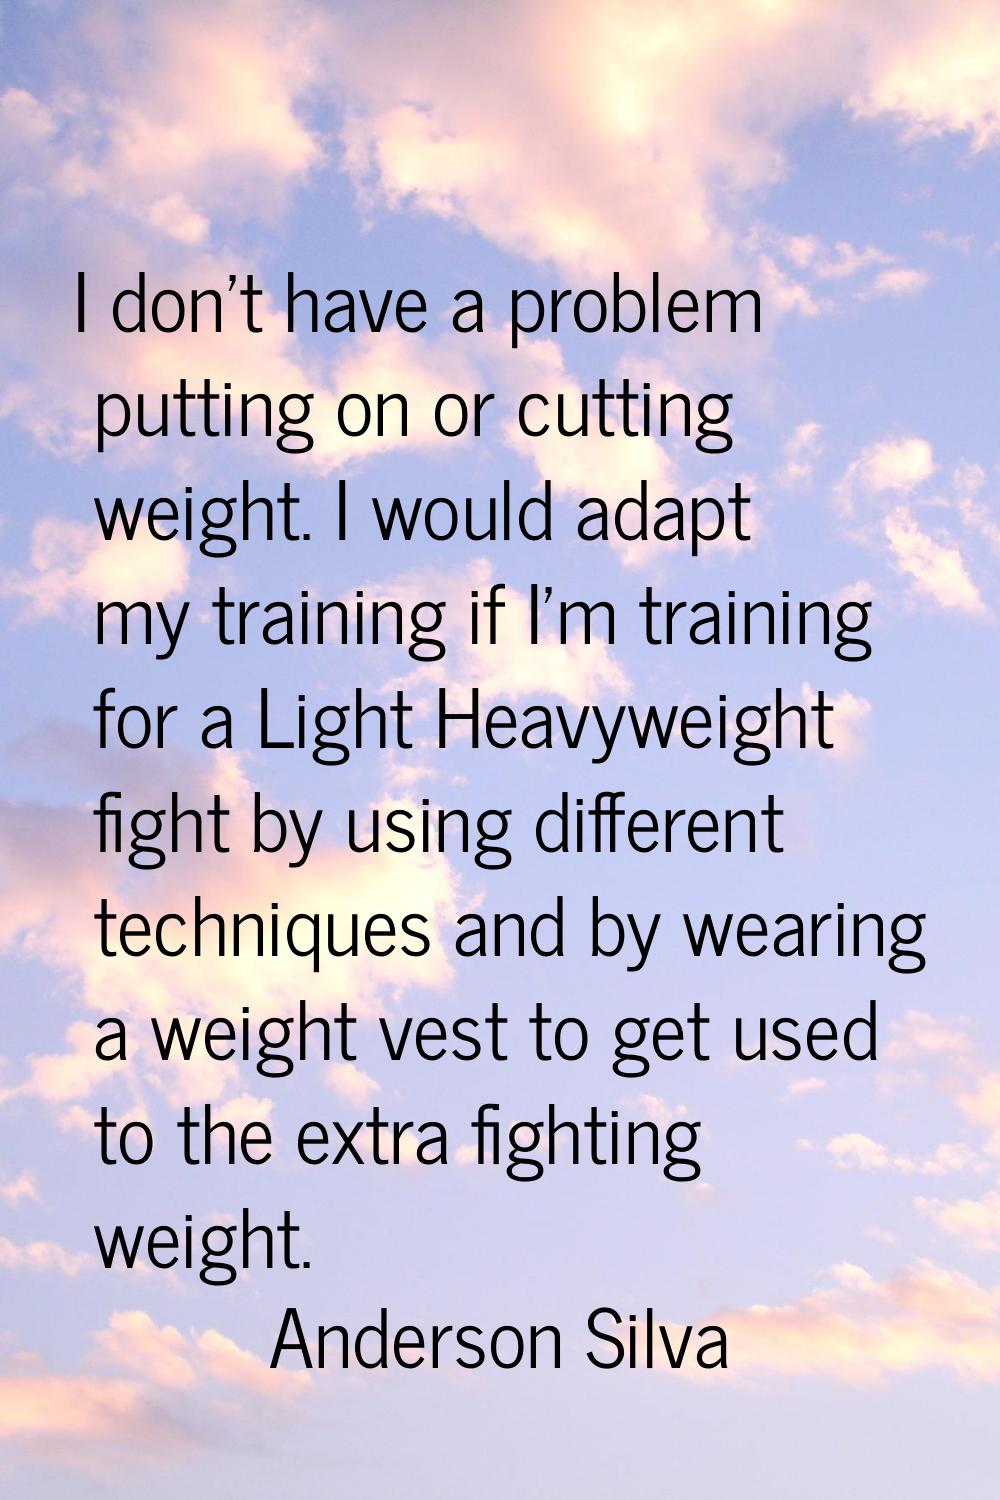 I don't have a problem putting on or cutting weight. I would adapt my training if I'm training for 